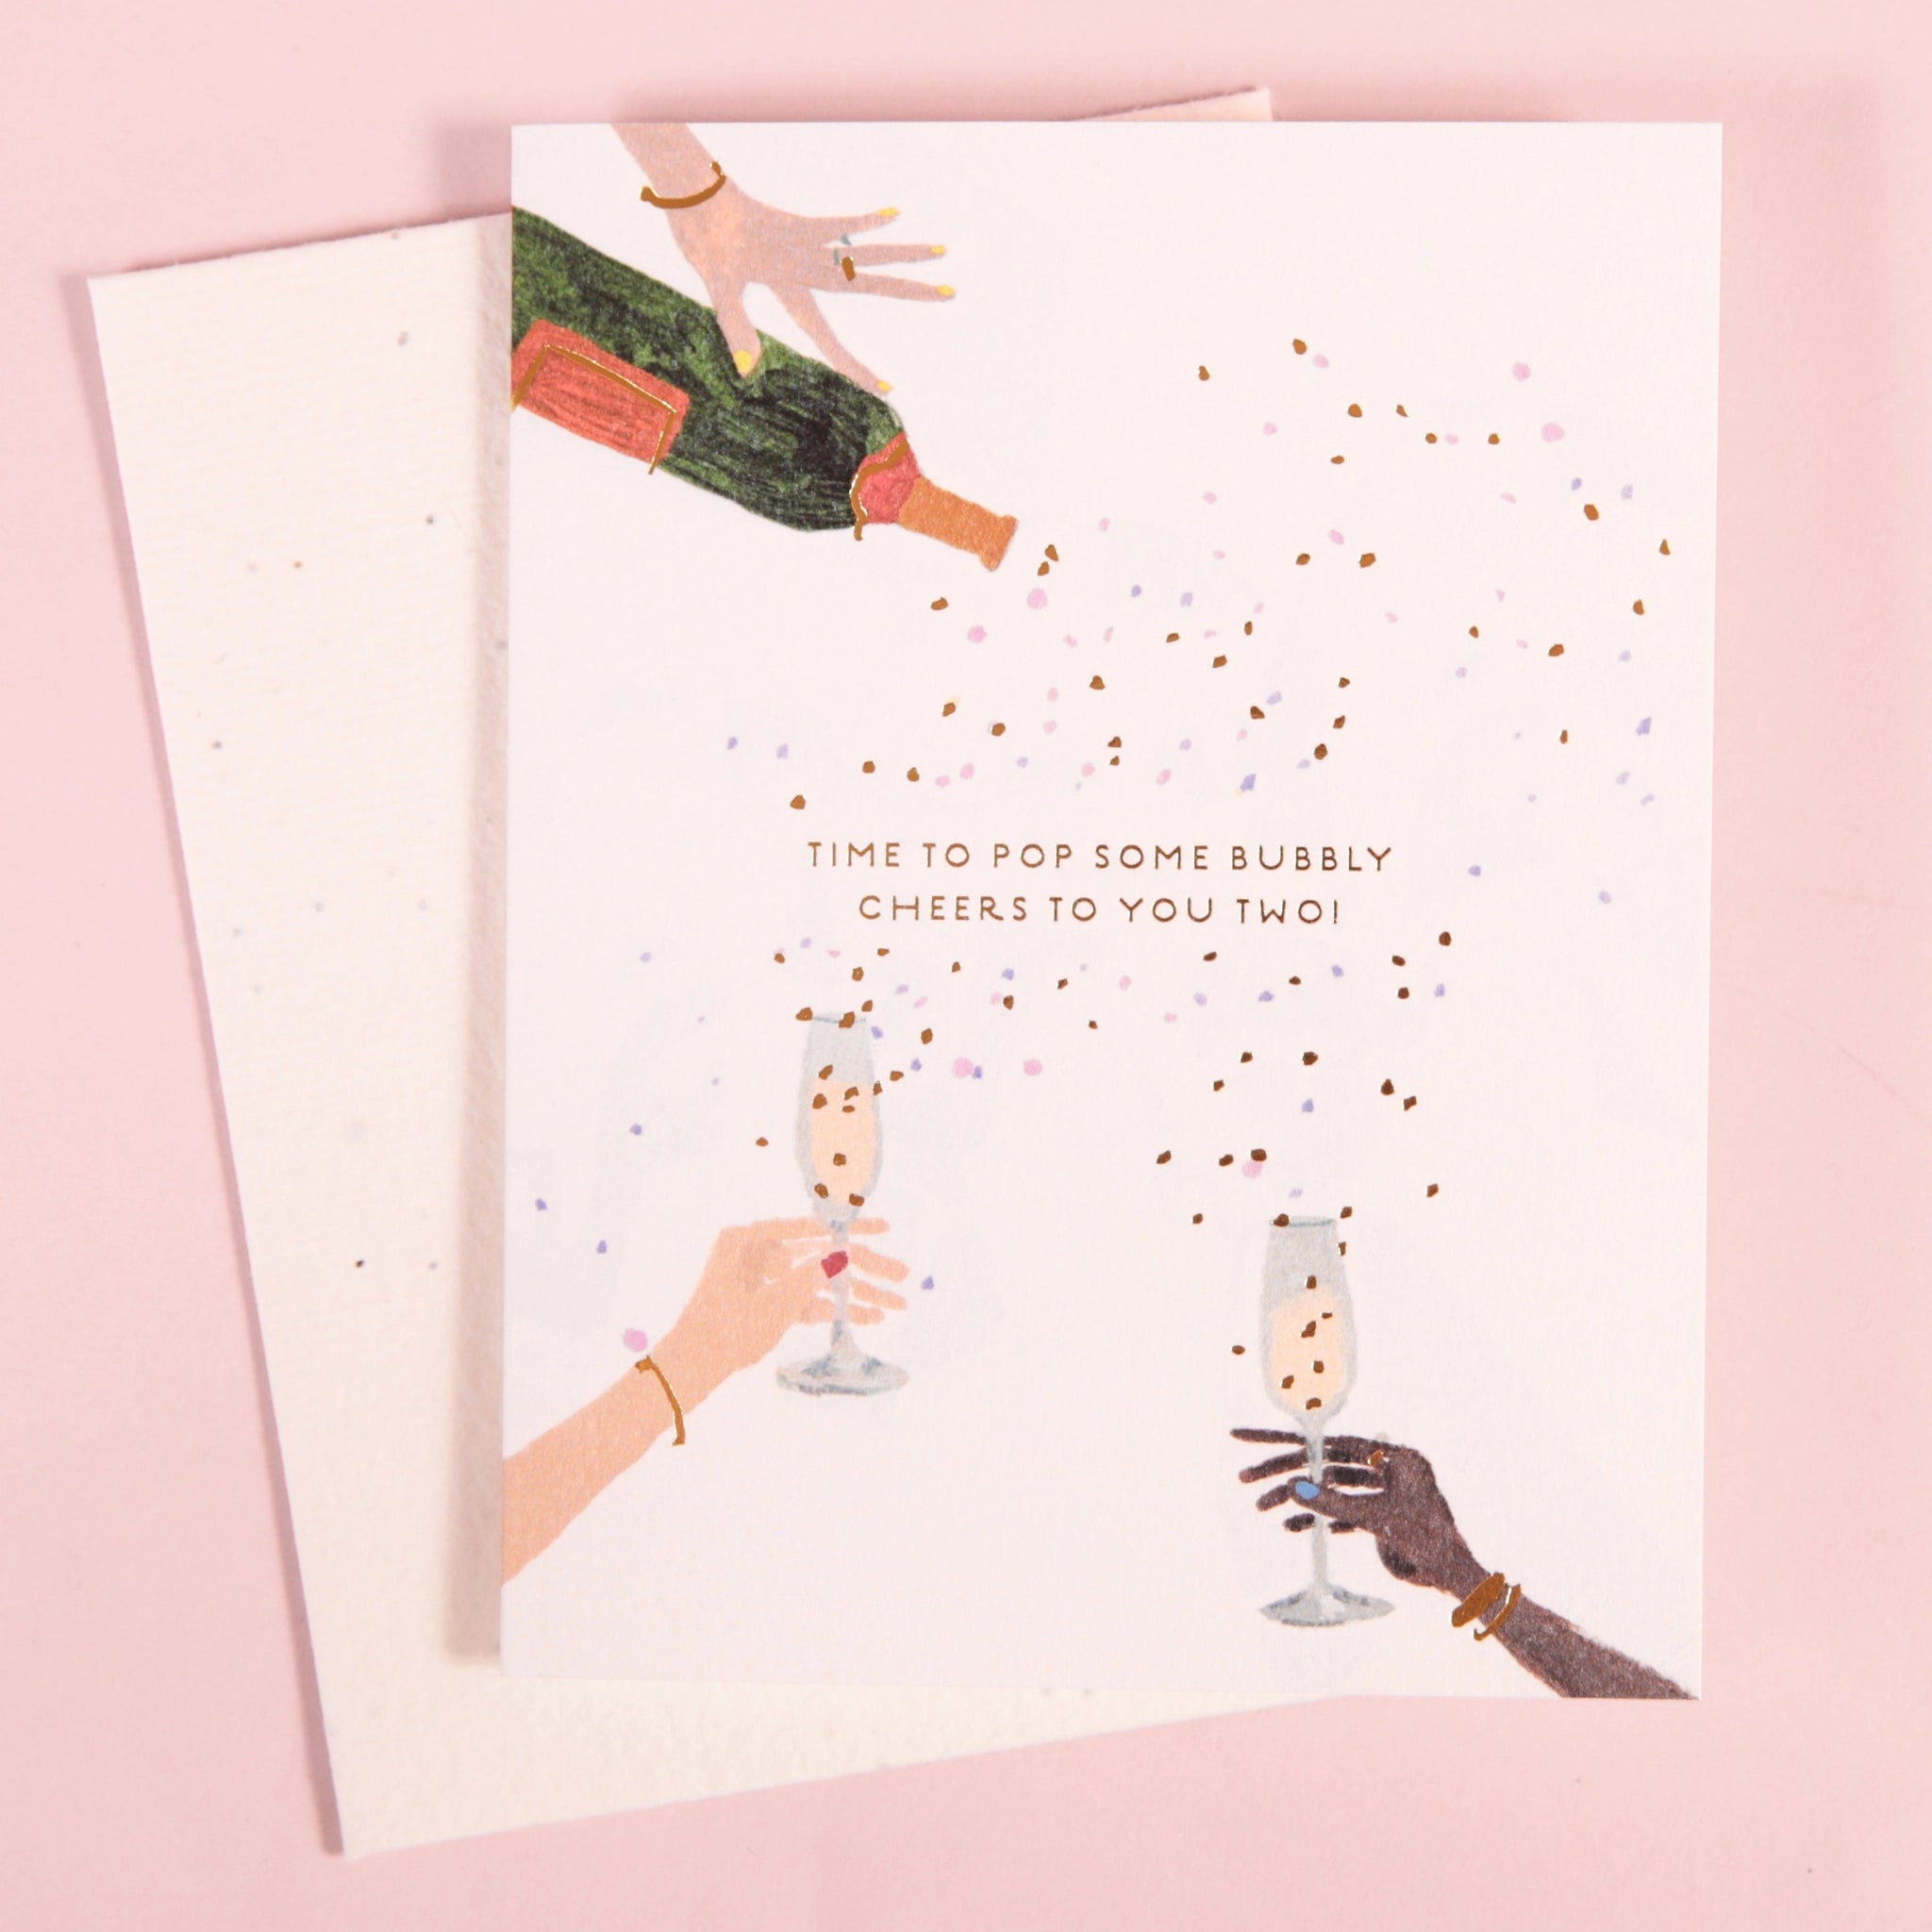 On a pink background is a white card and envelope with an illustration of three hands holding a bottle of Champagne and the others holding champagne flutes with confetti all over and small text that reads, "Time to pop some bubbly cheers to you two!".